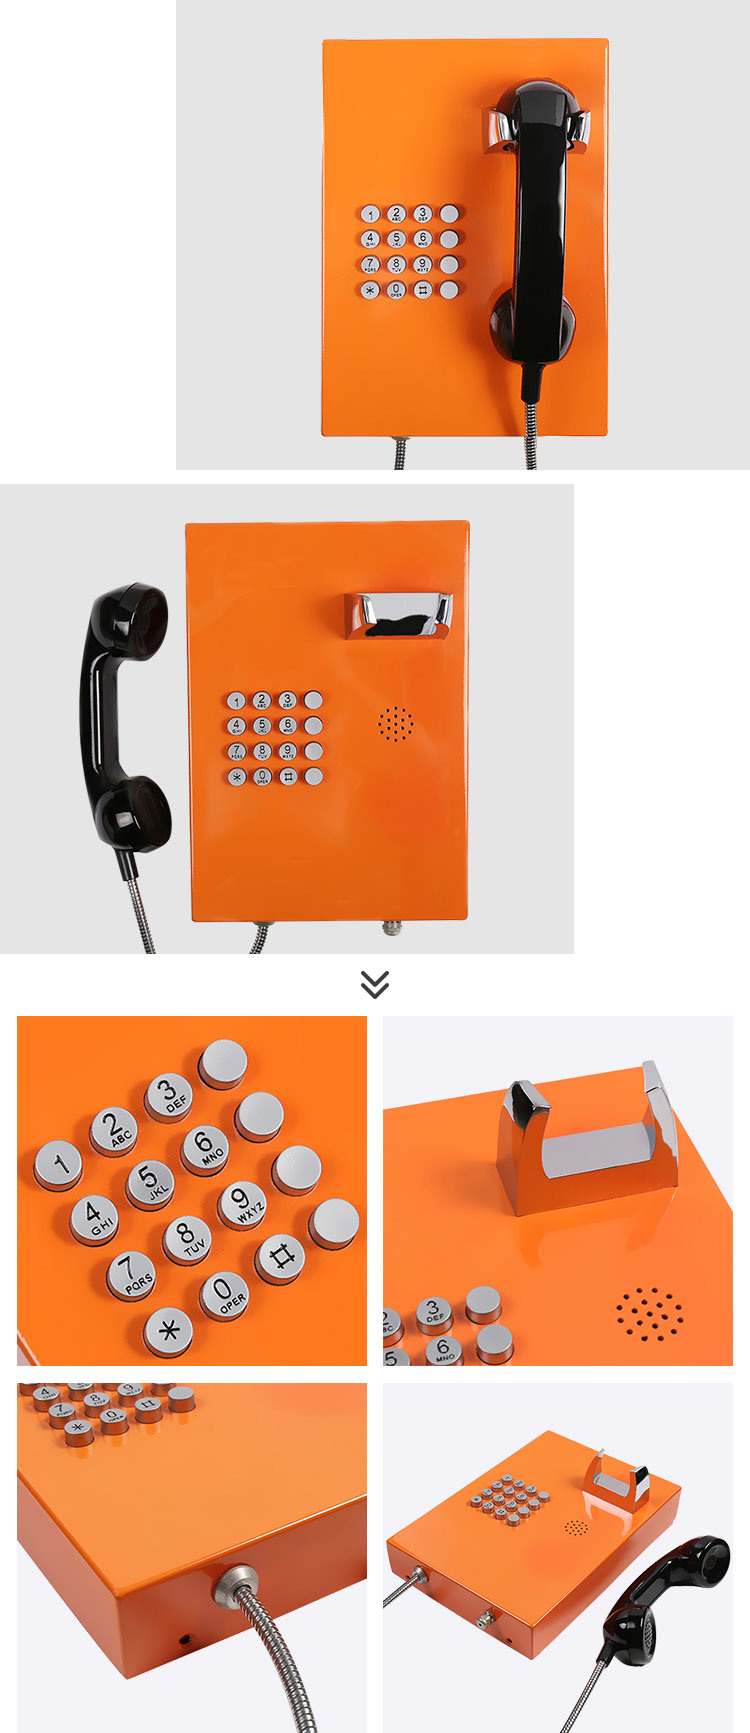 IP Telephone Industrial Self-Service Telephones for Airports